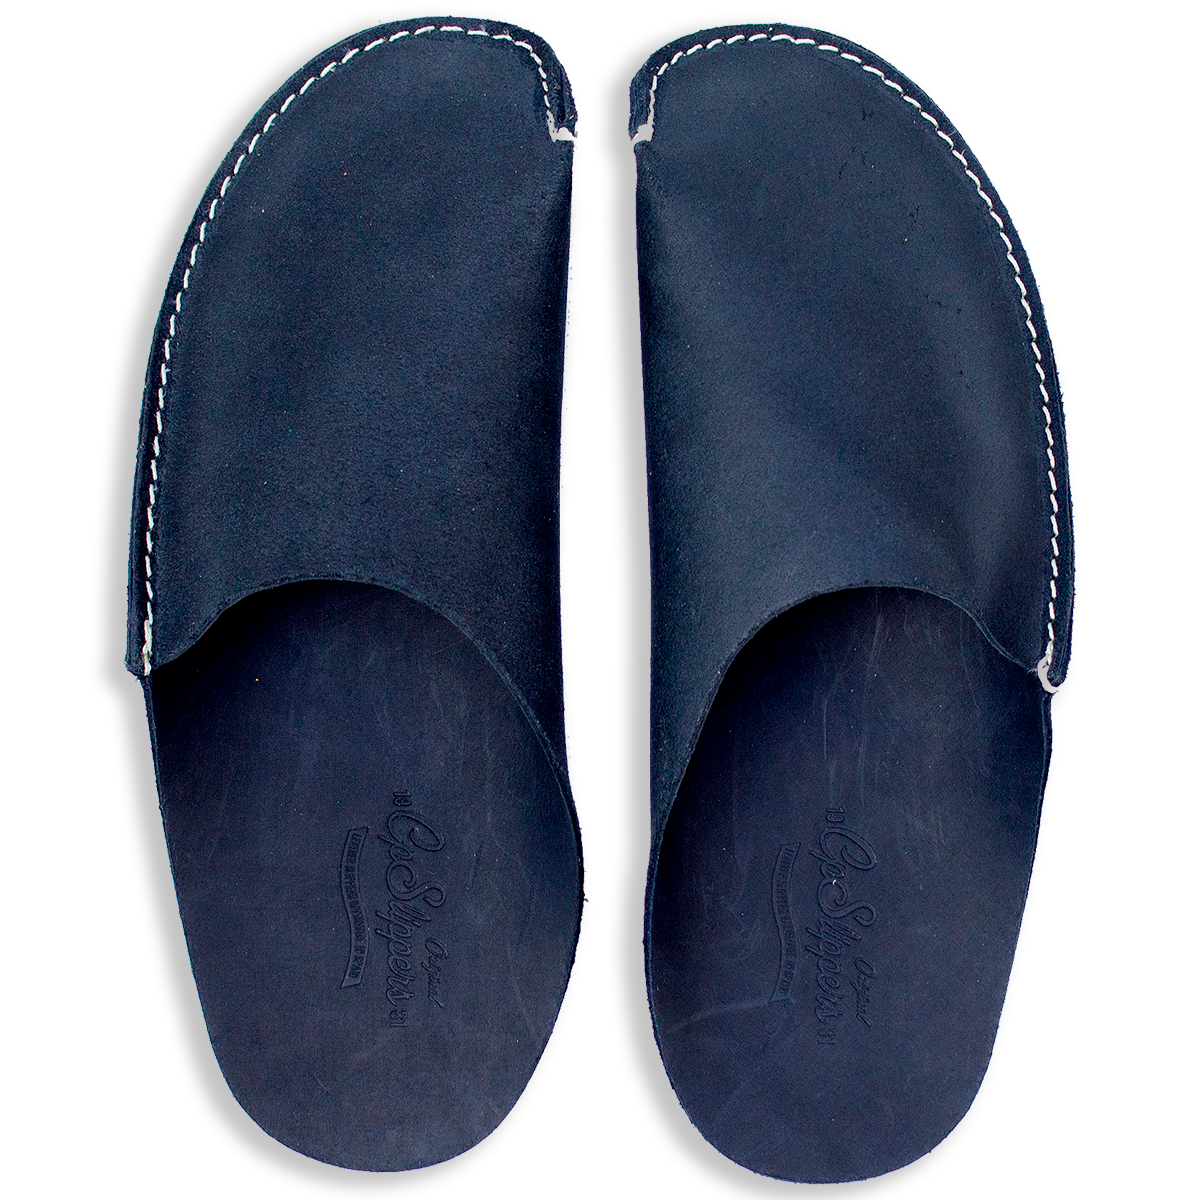 Mnimalist CP Slippers leather home shoes